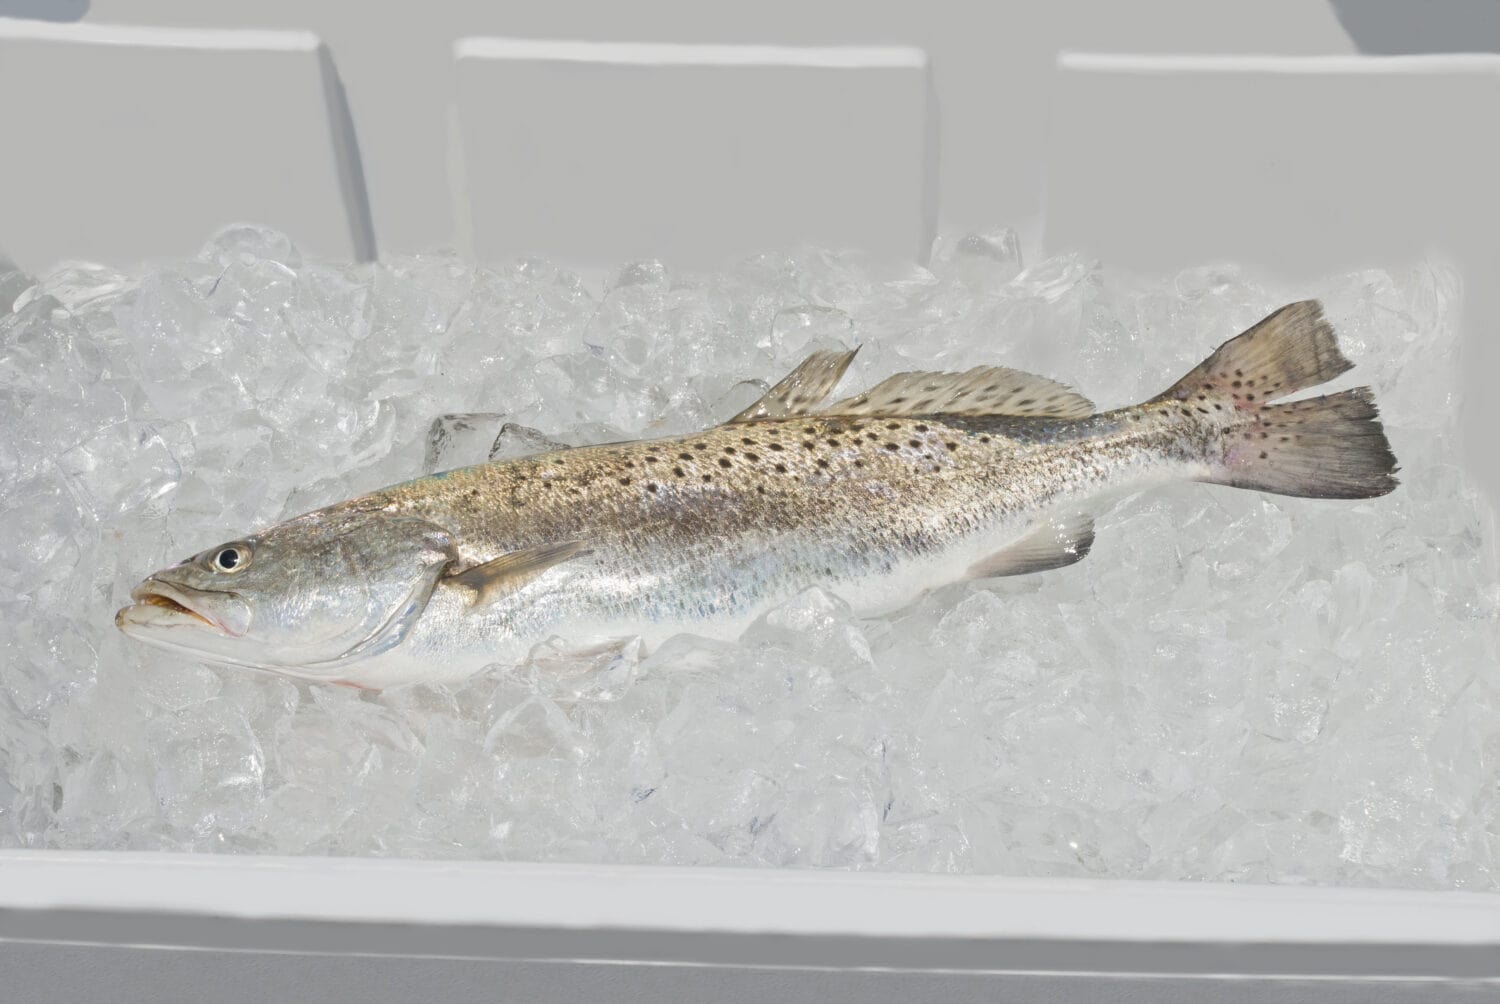 A freshly caught Spotted Seatrout (Cynoscion nebulosus) on ice in a cooler.